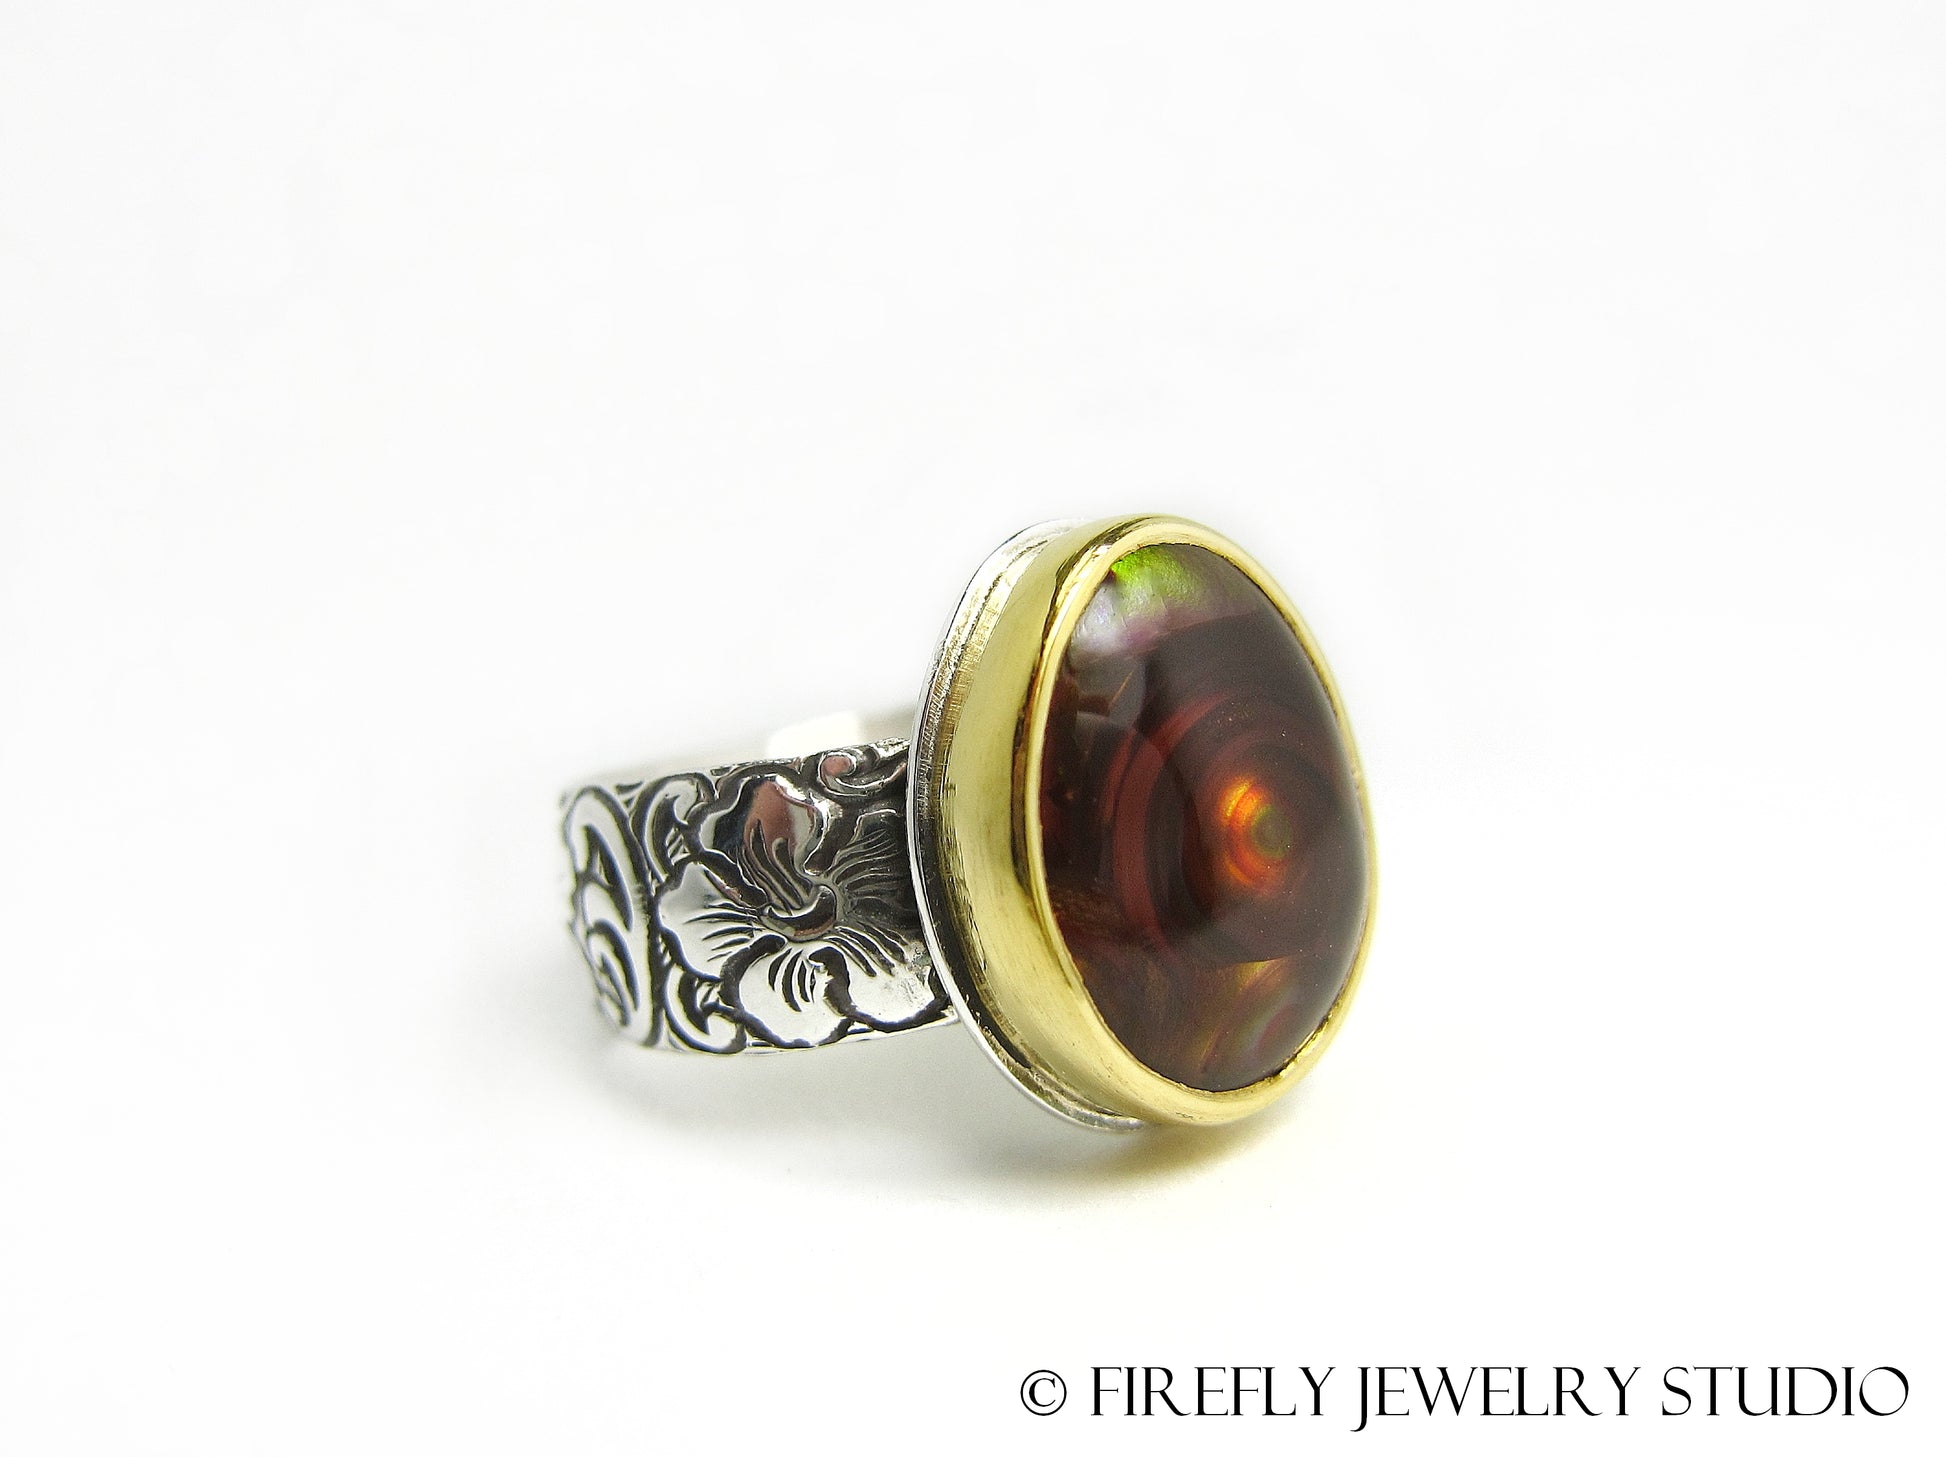 Fire Agate Vortex Ring in 24k Gold and Sterling Silver. Size 6.75 - Firefly Jewelry Studio